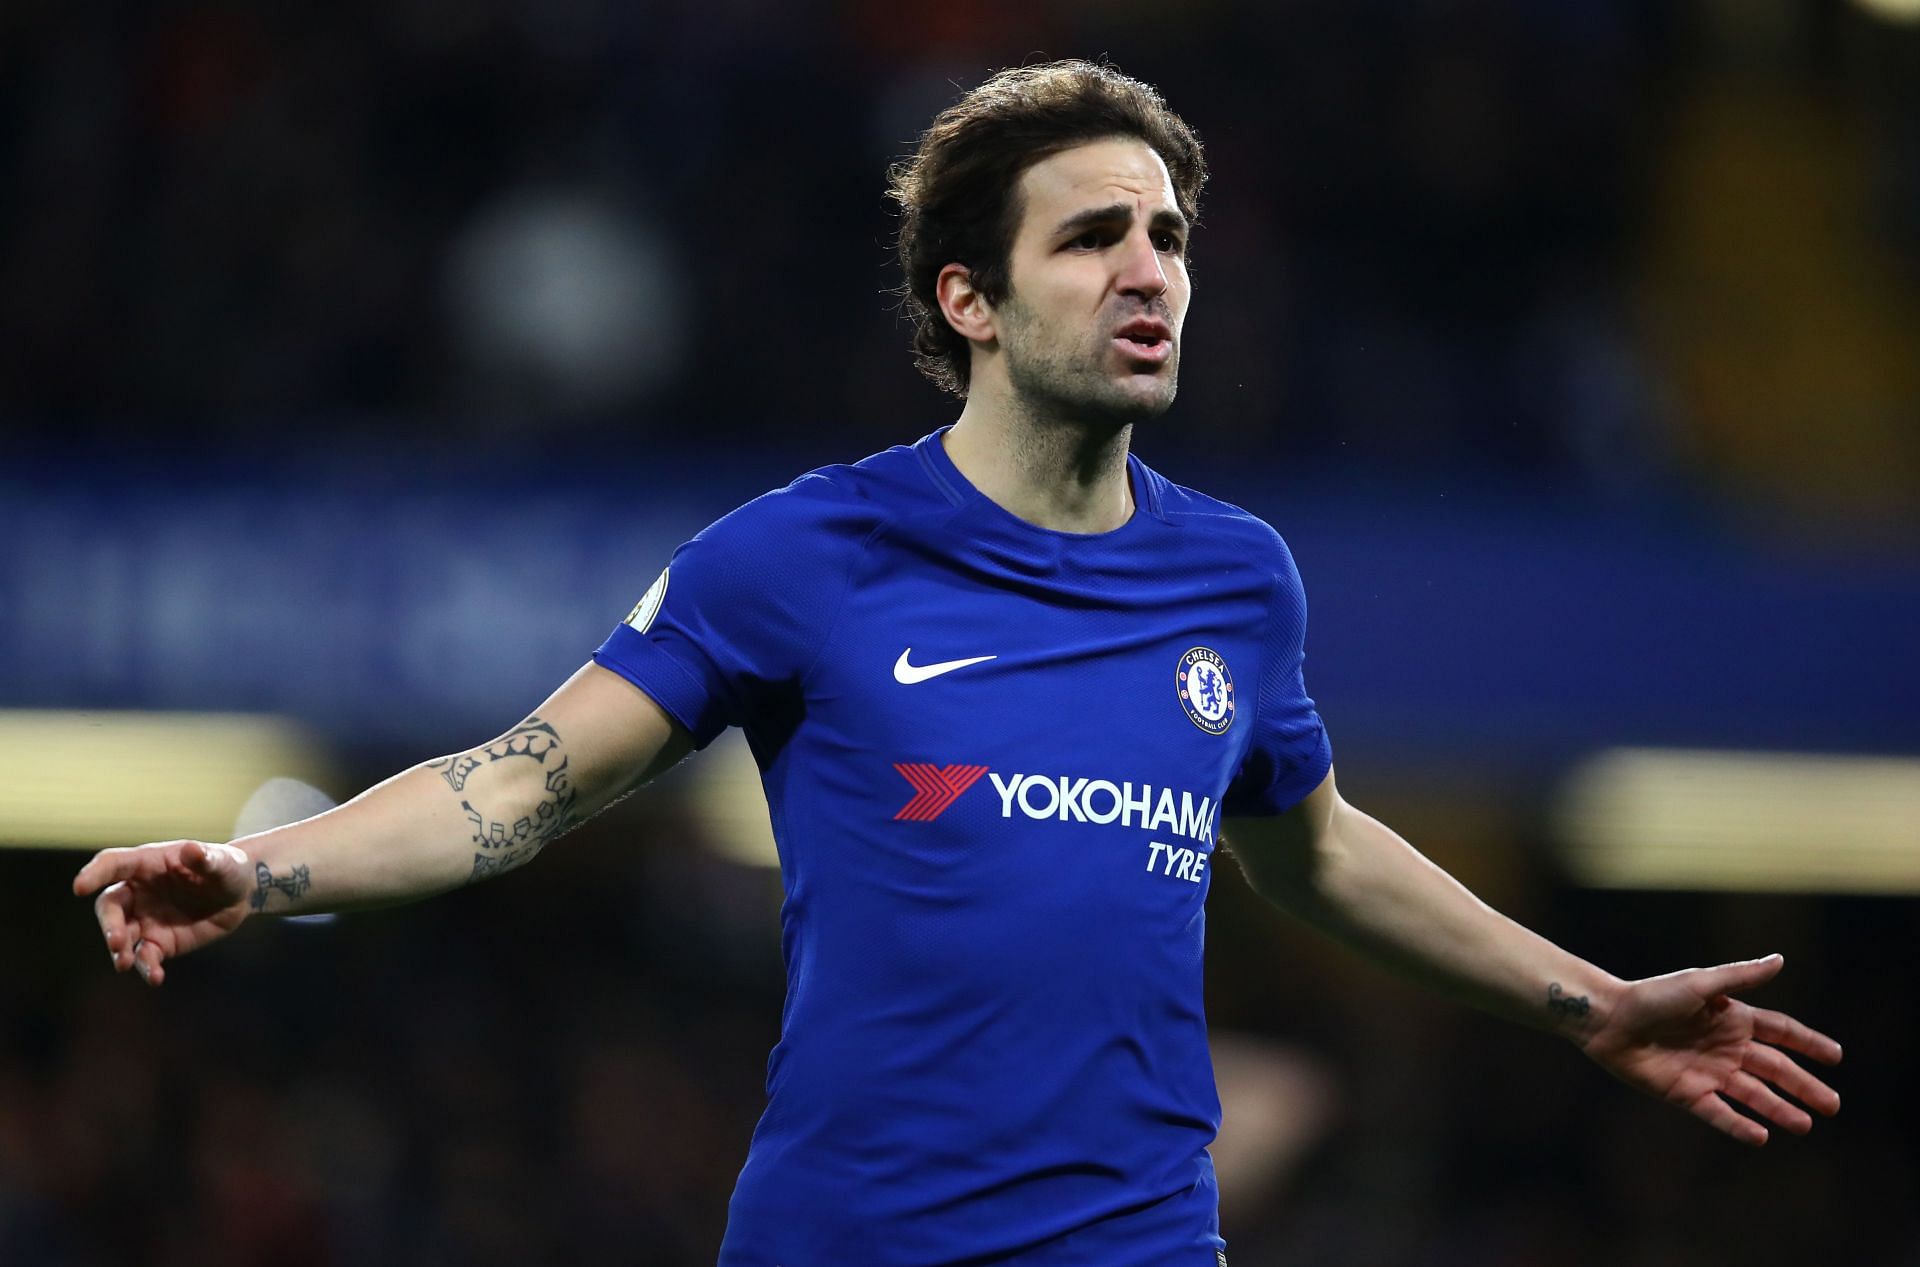 Fabregas is one of the top players to represent both the London-based clubs